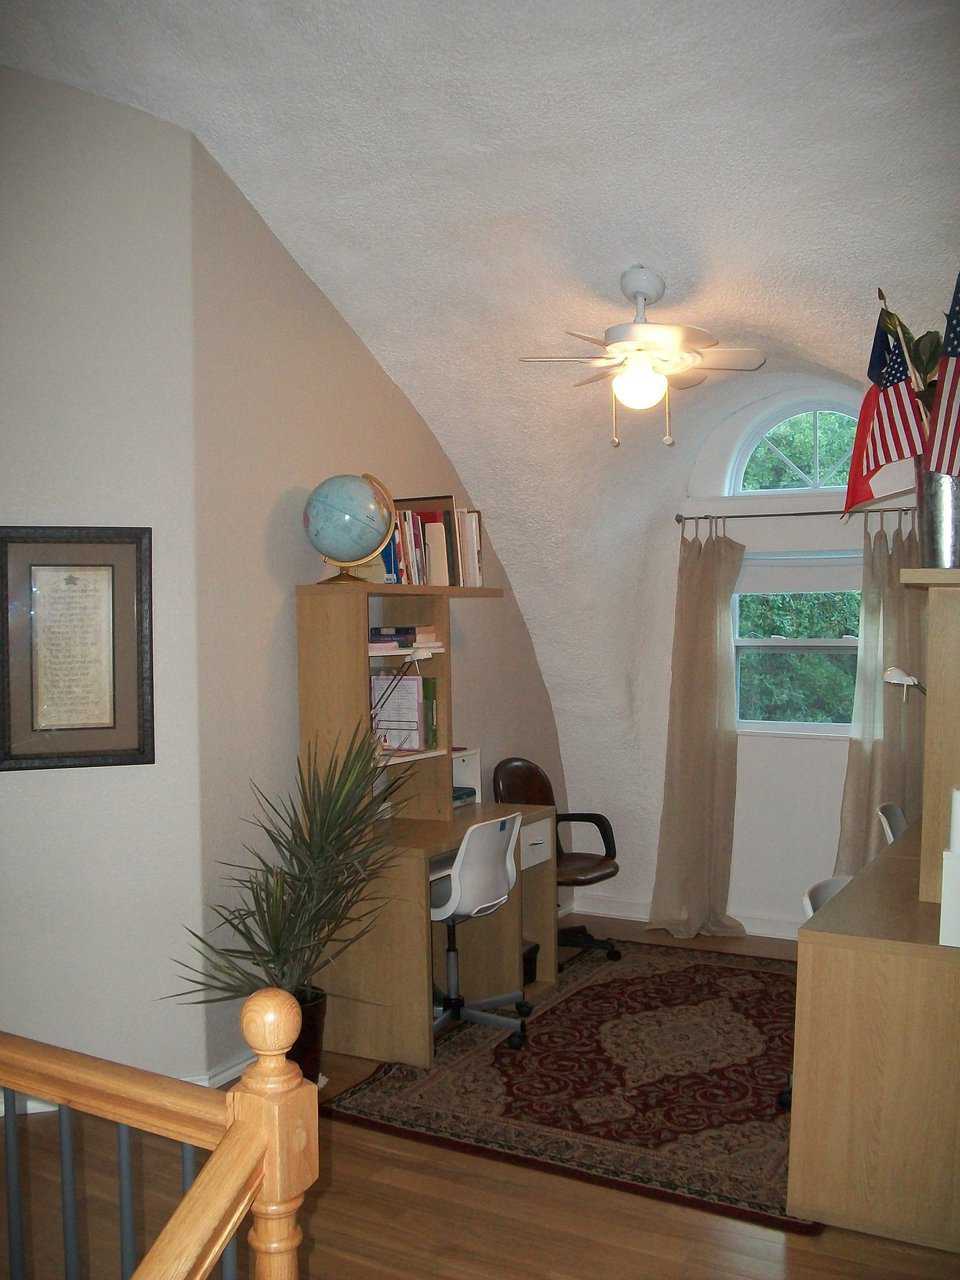 This alcove makes a nice study or office area.